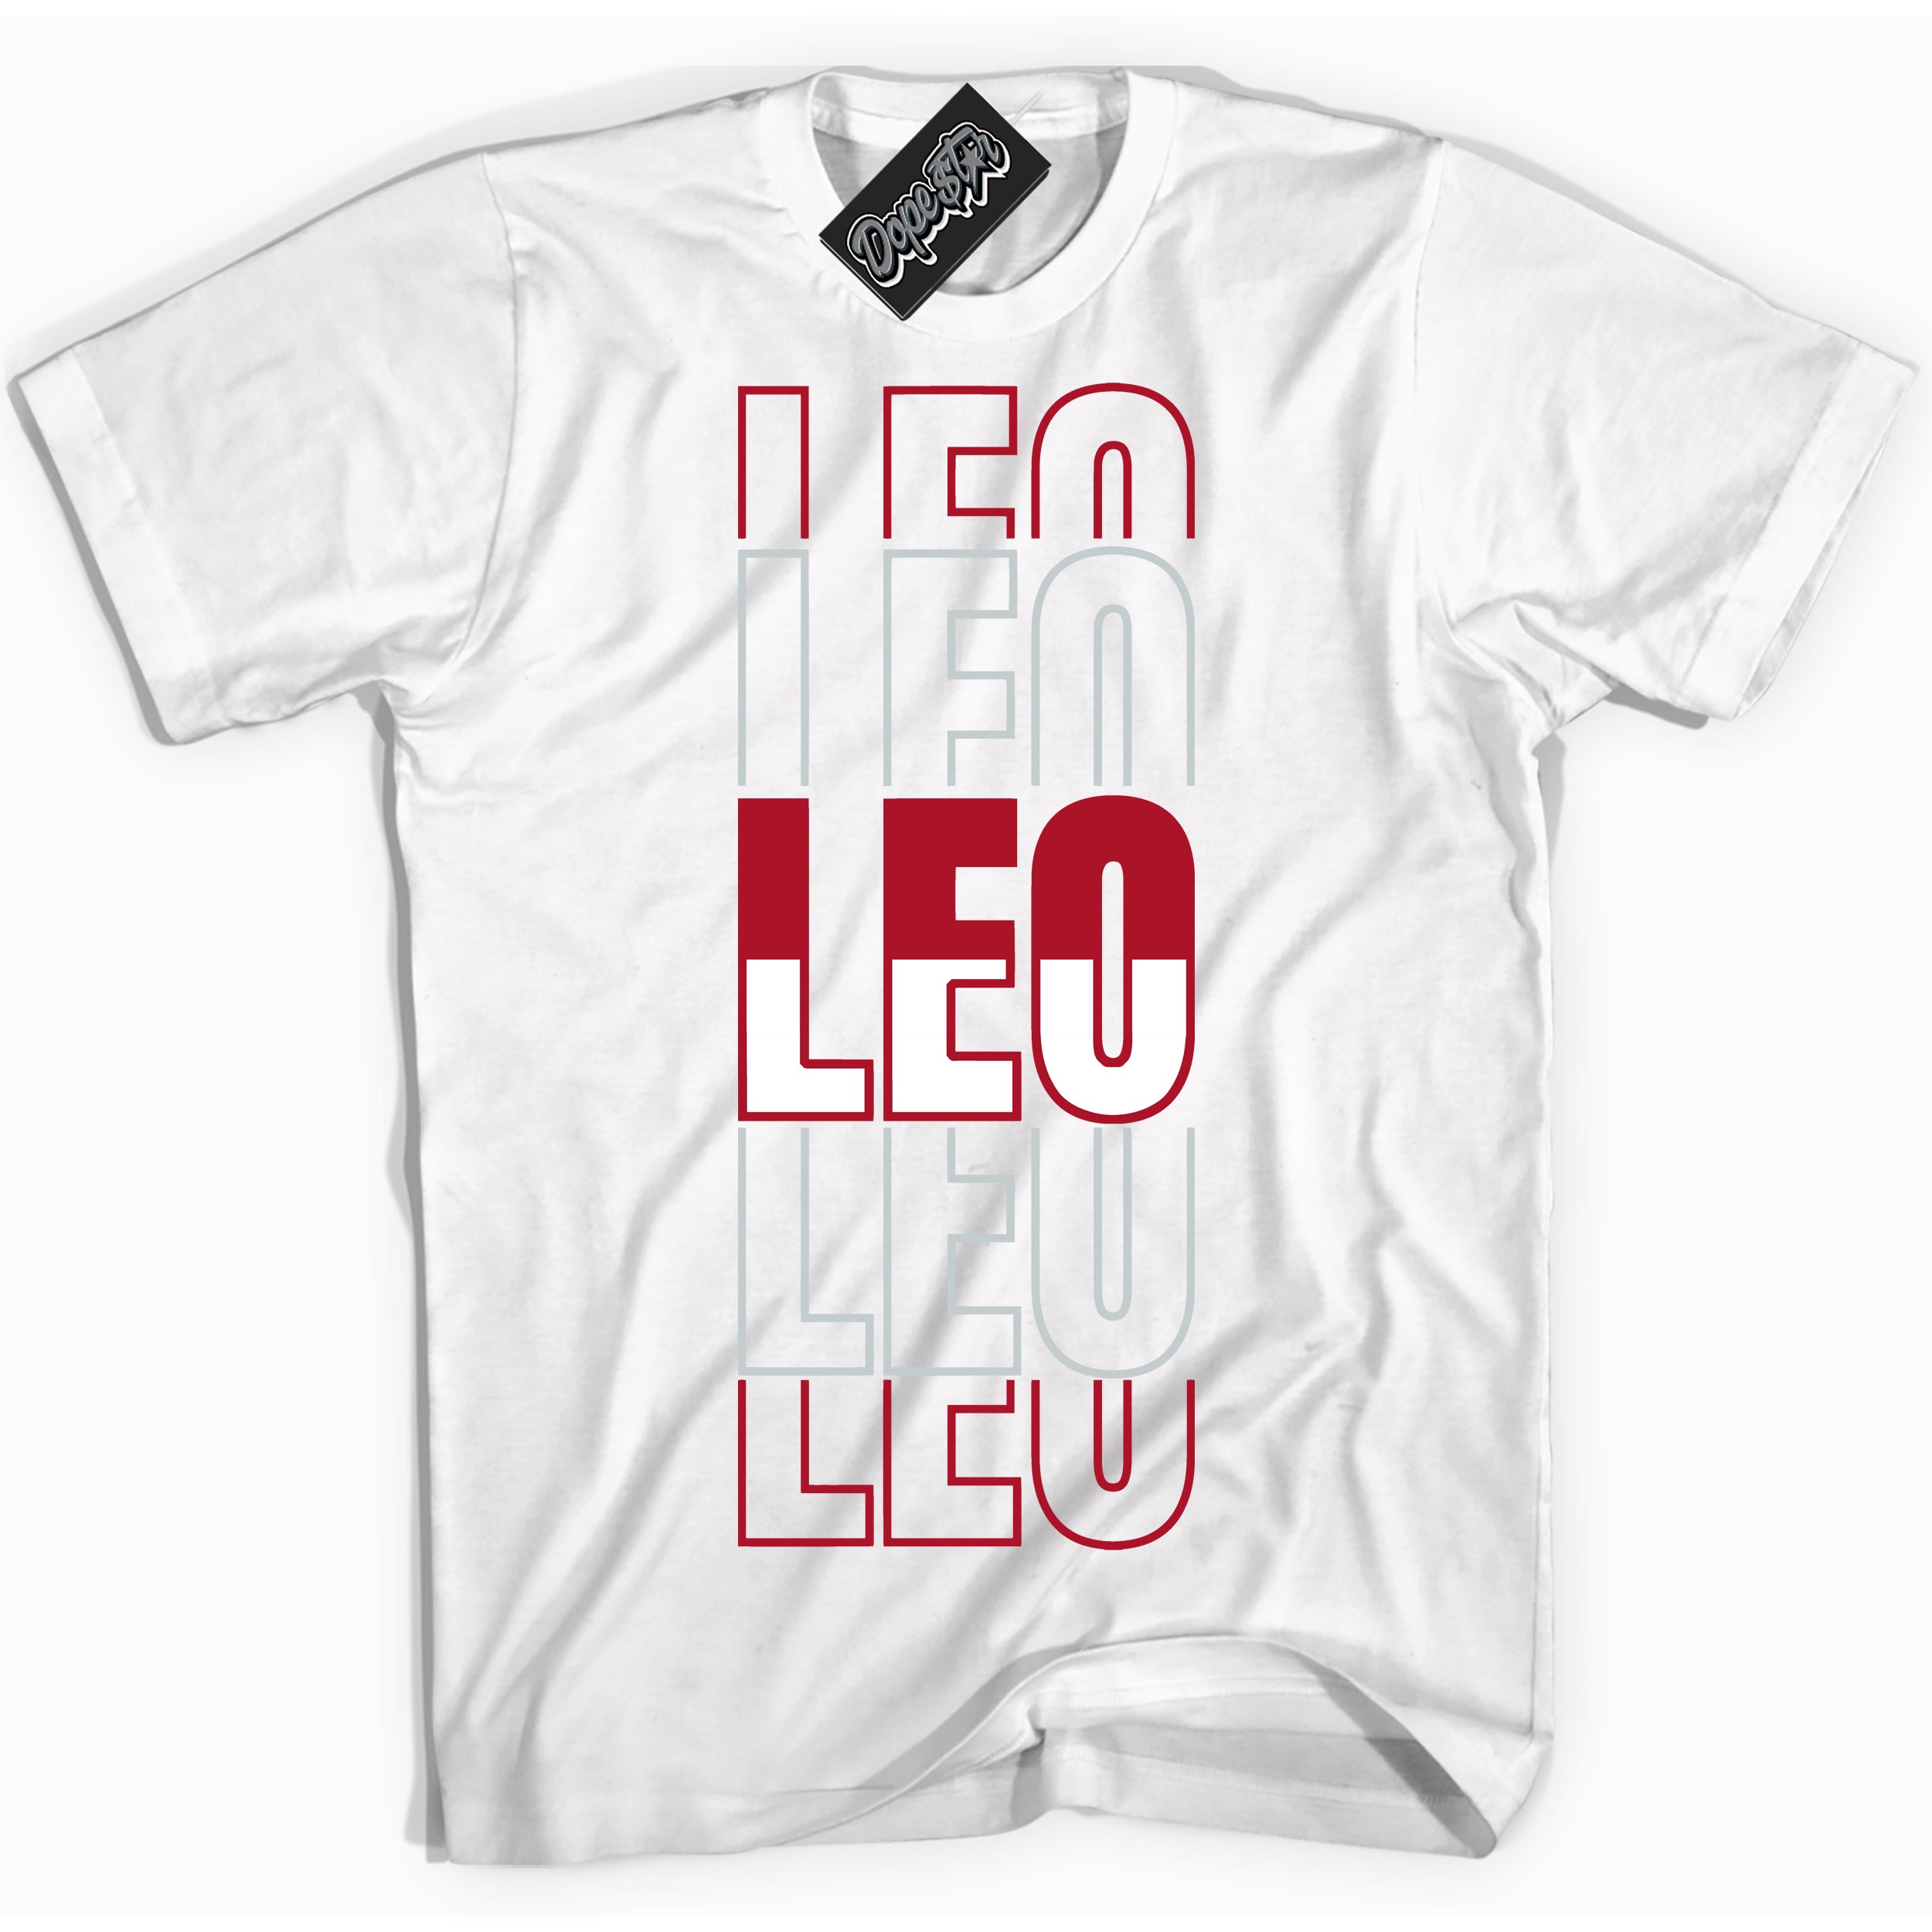 Cool White Shirt with “ Leo” design that perfectly matches Reverse Ultraman Sneakers.